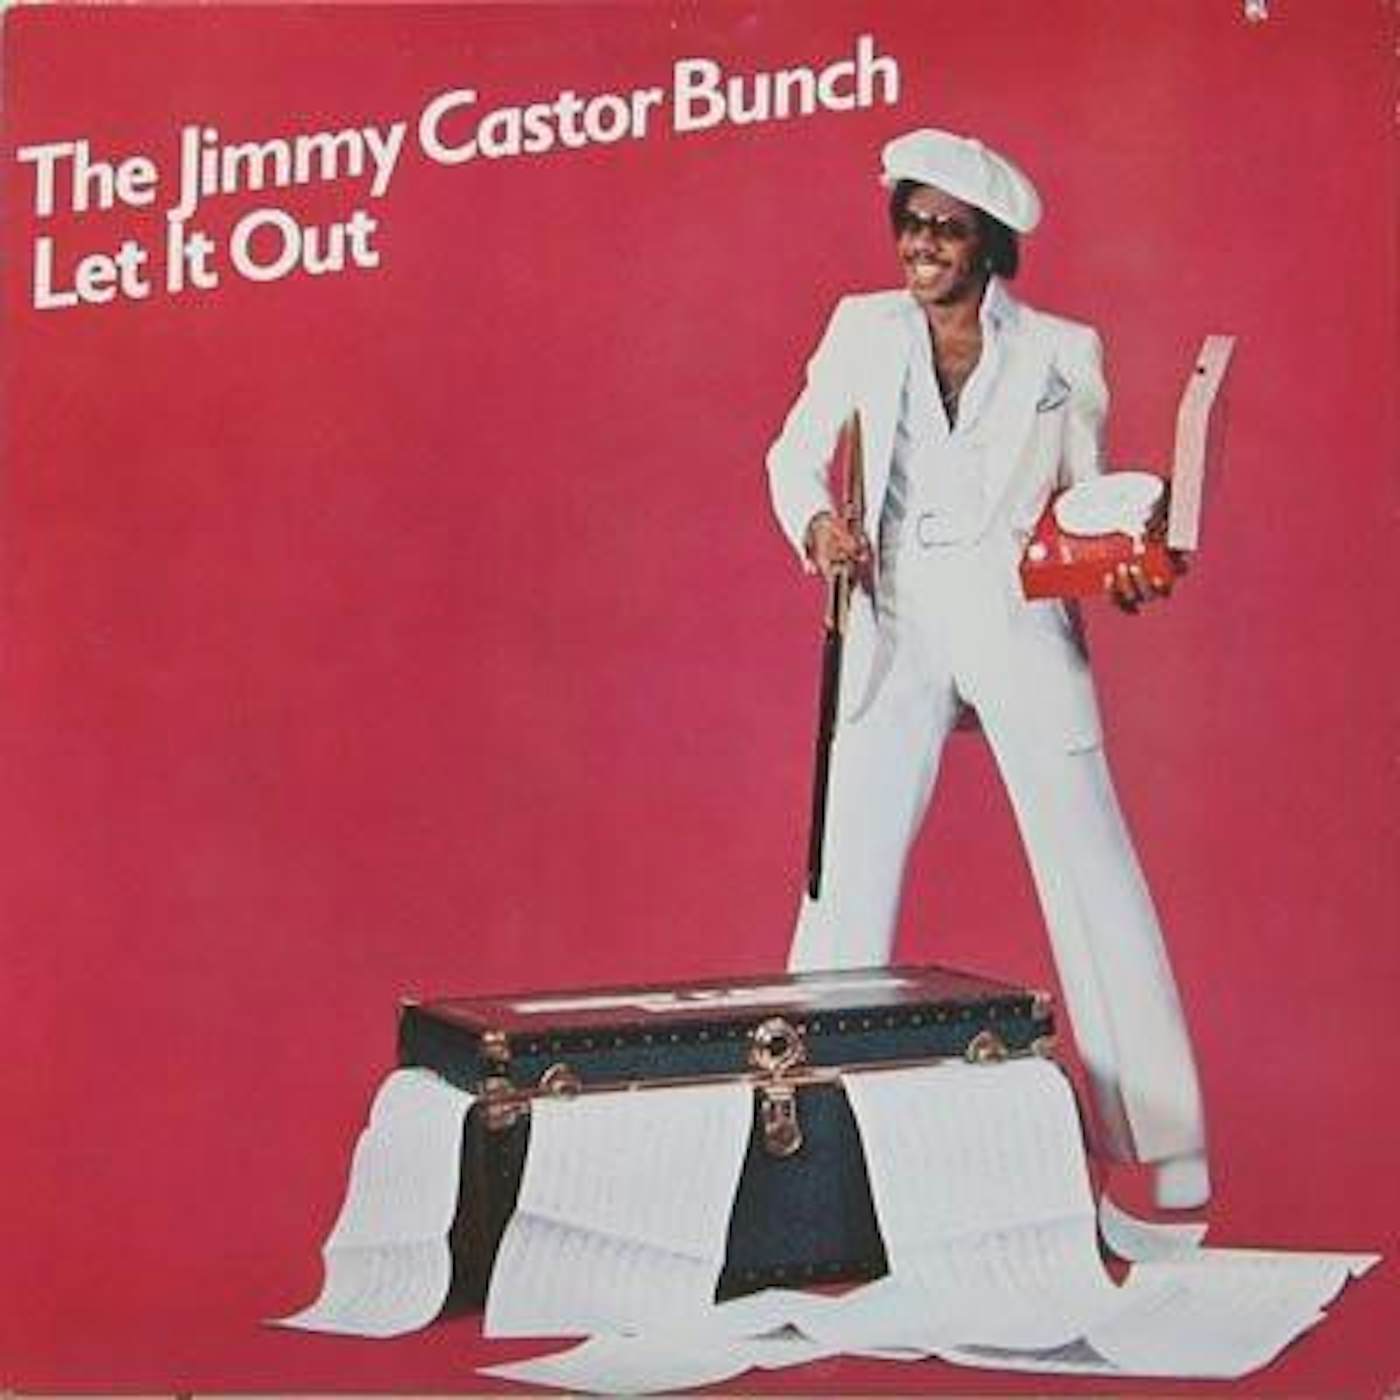 The Jimmy Castor Bunch LET IT OUT CD